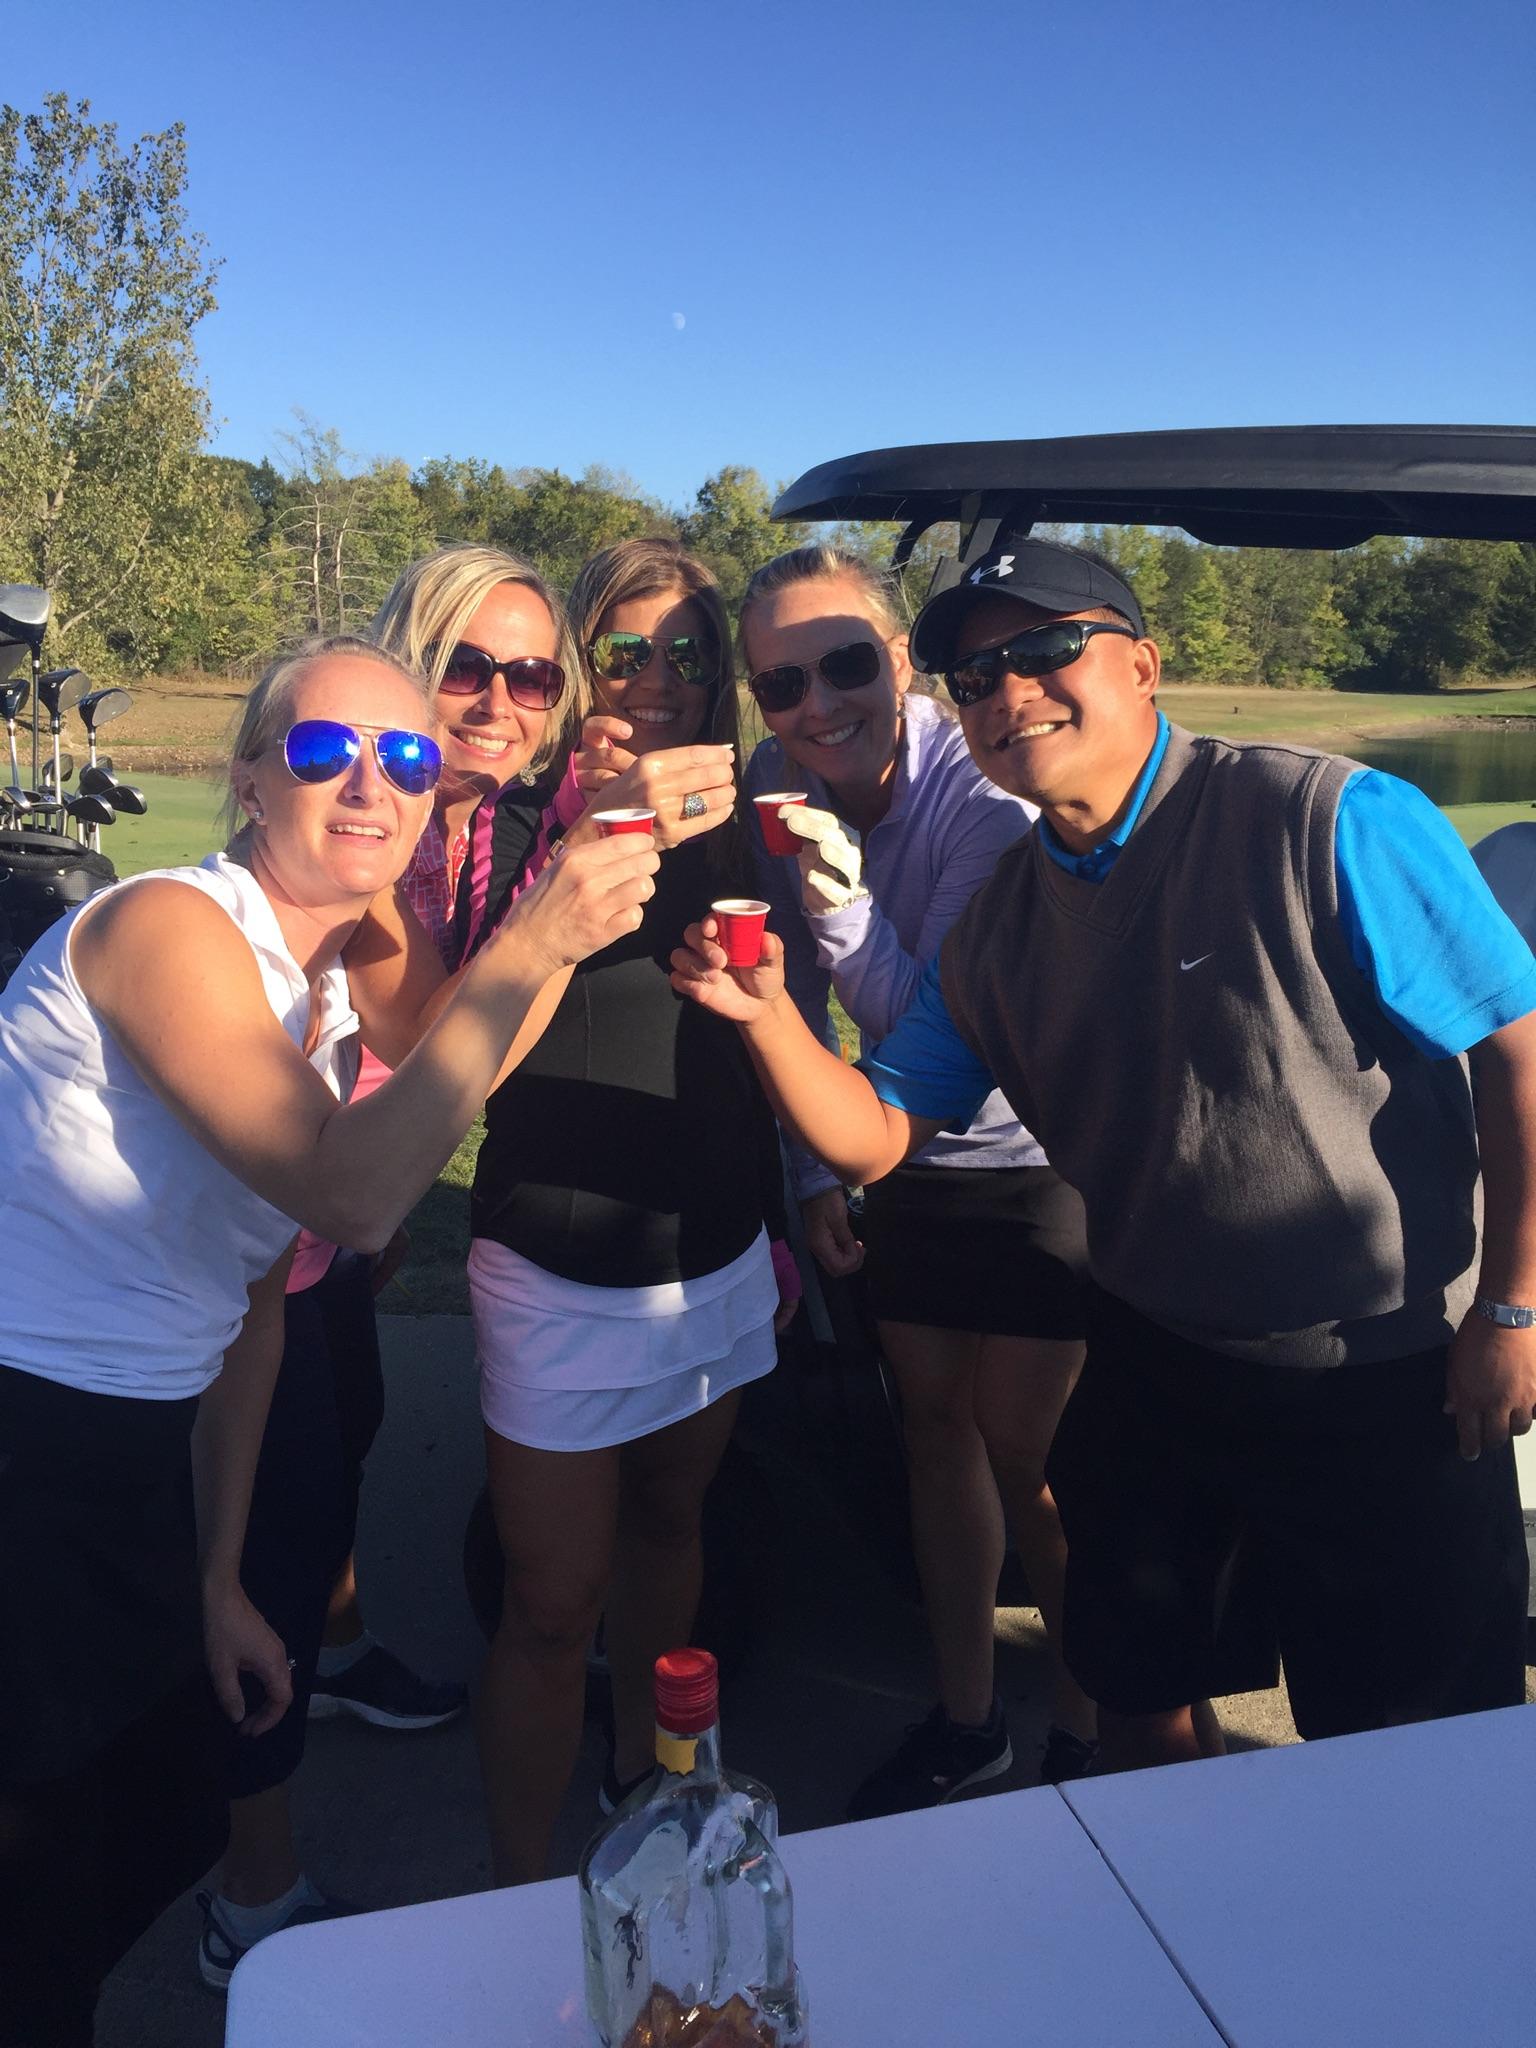 Second Annual Toy Story Golf Scramble benefitting Toys for Tots